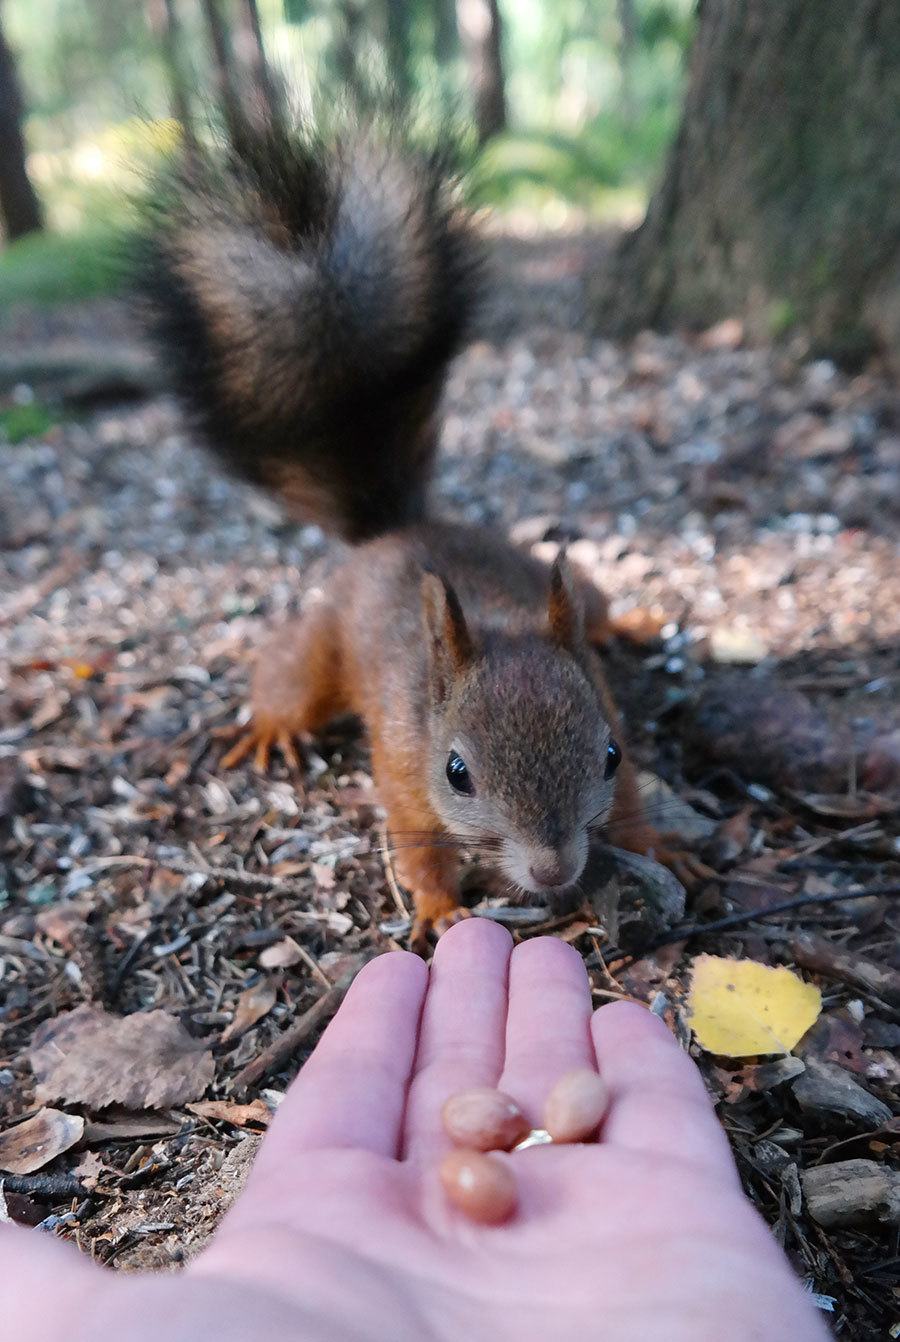 Yes, it's true, even I was able to feed the squirrels!